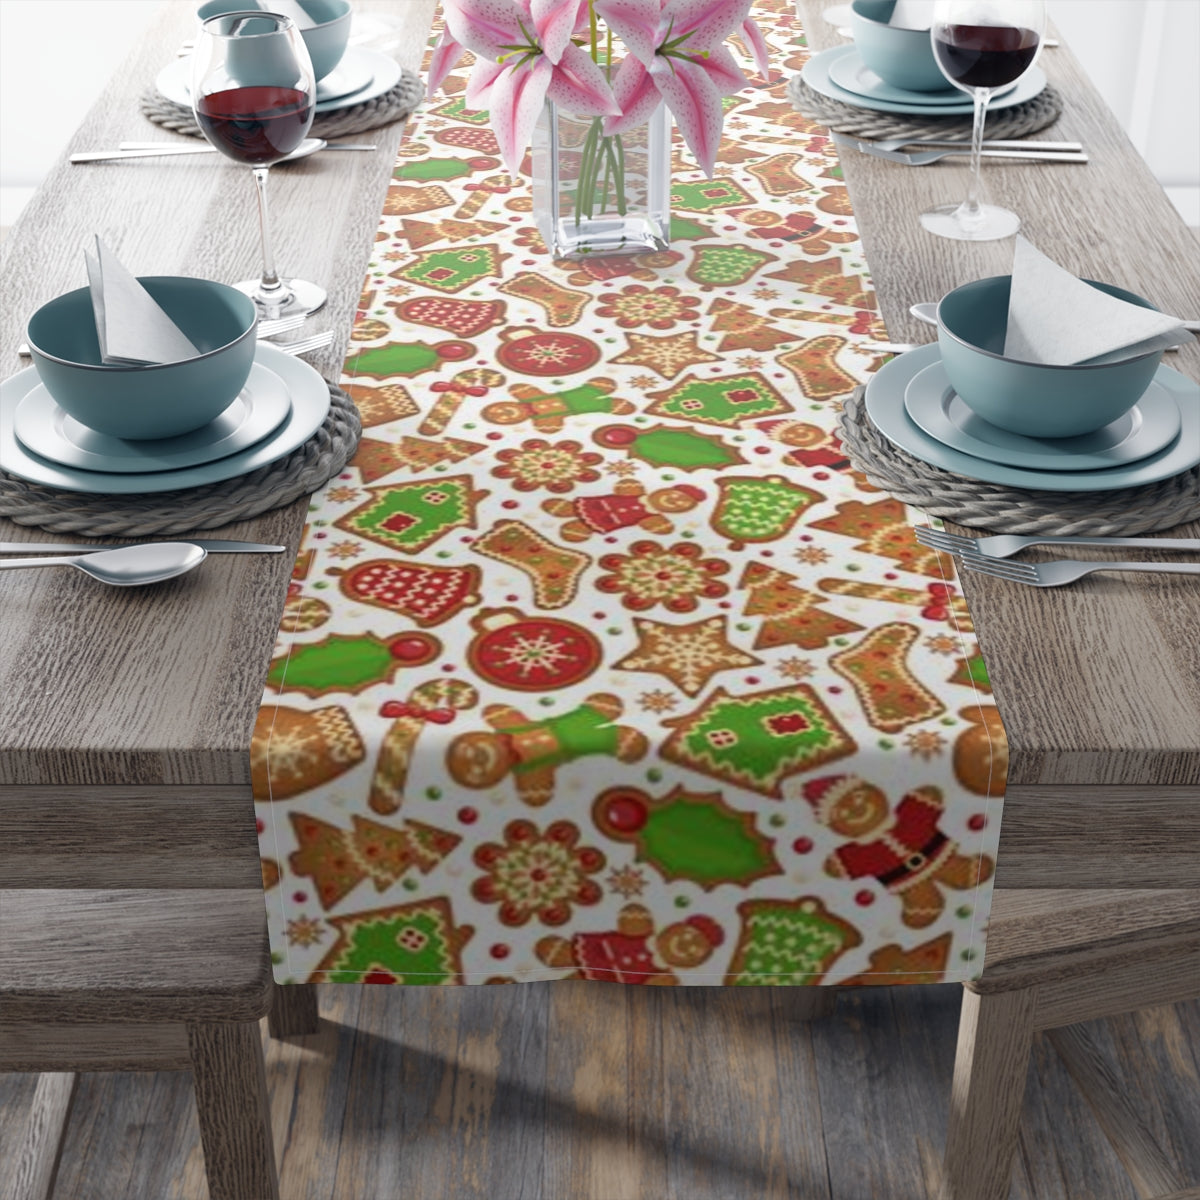 Gingerbread Table Runner, Holiday Xmas Christmas Cookies Festive Home Decor Decoration Theme Tablecloth Linen Starcove Fashion